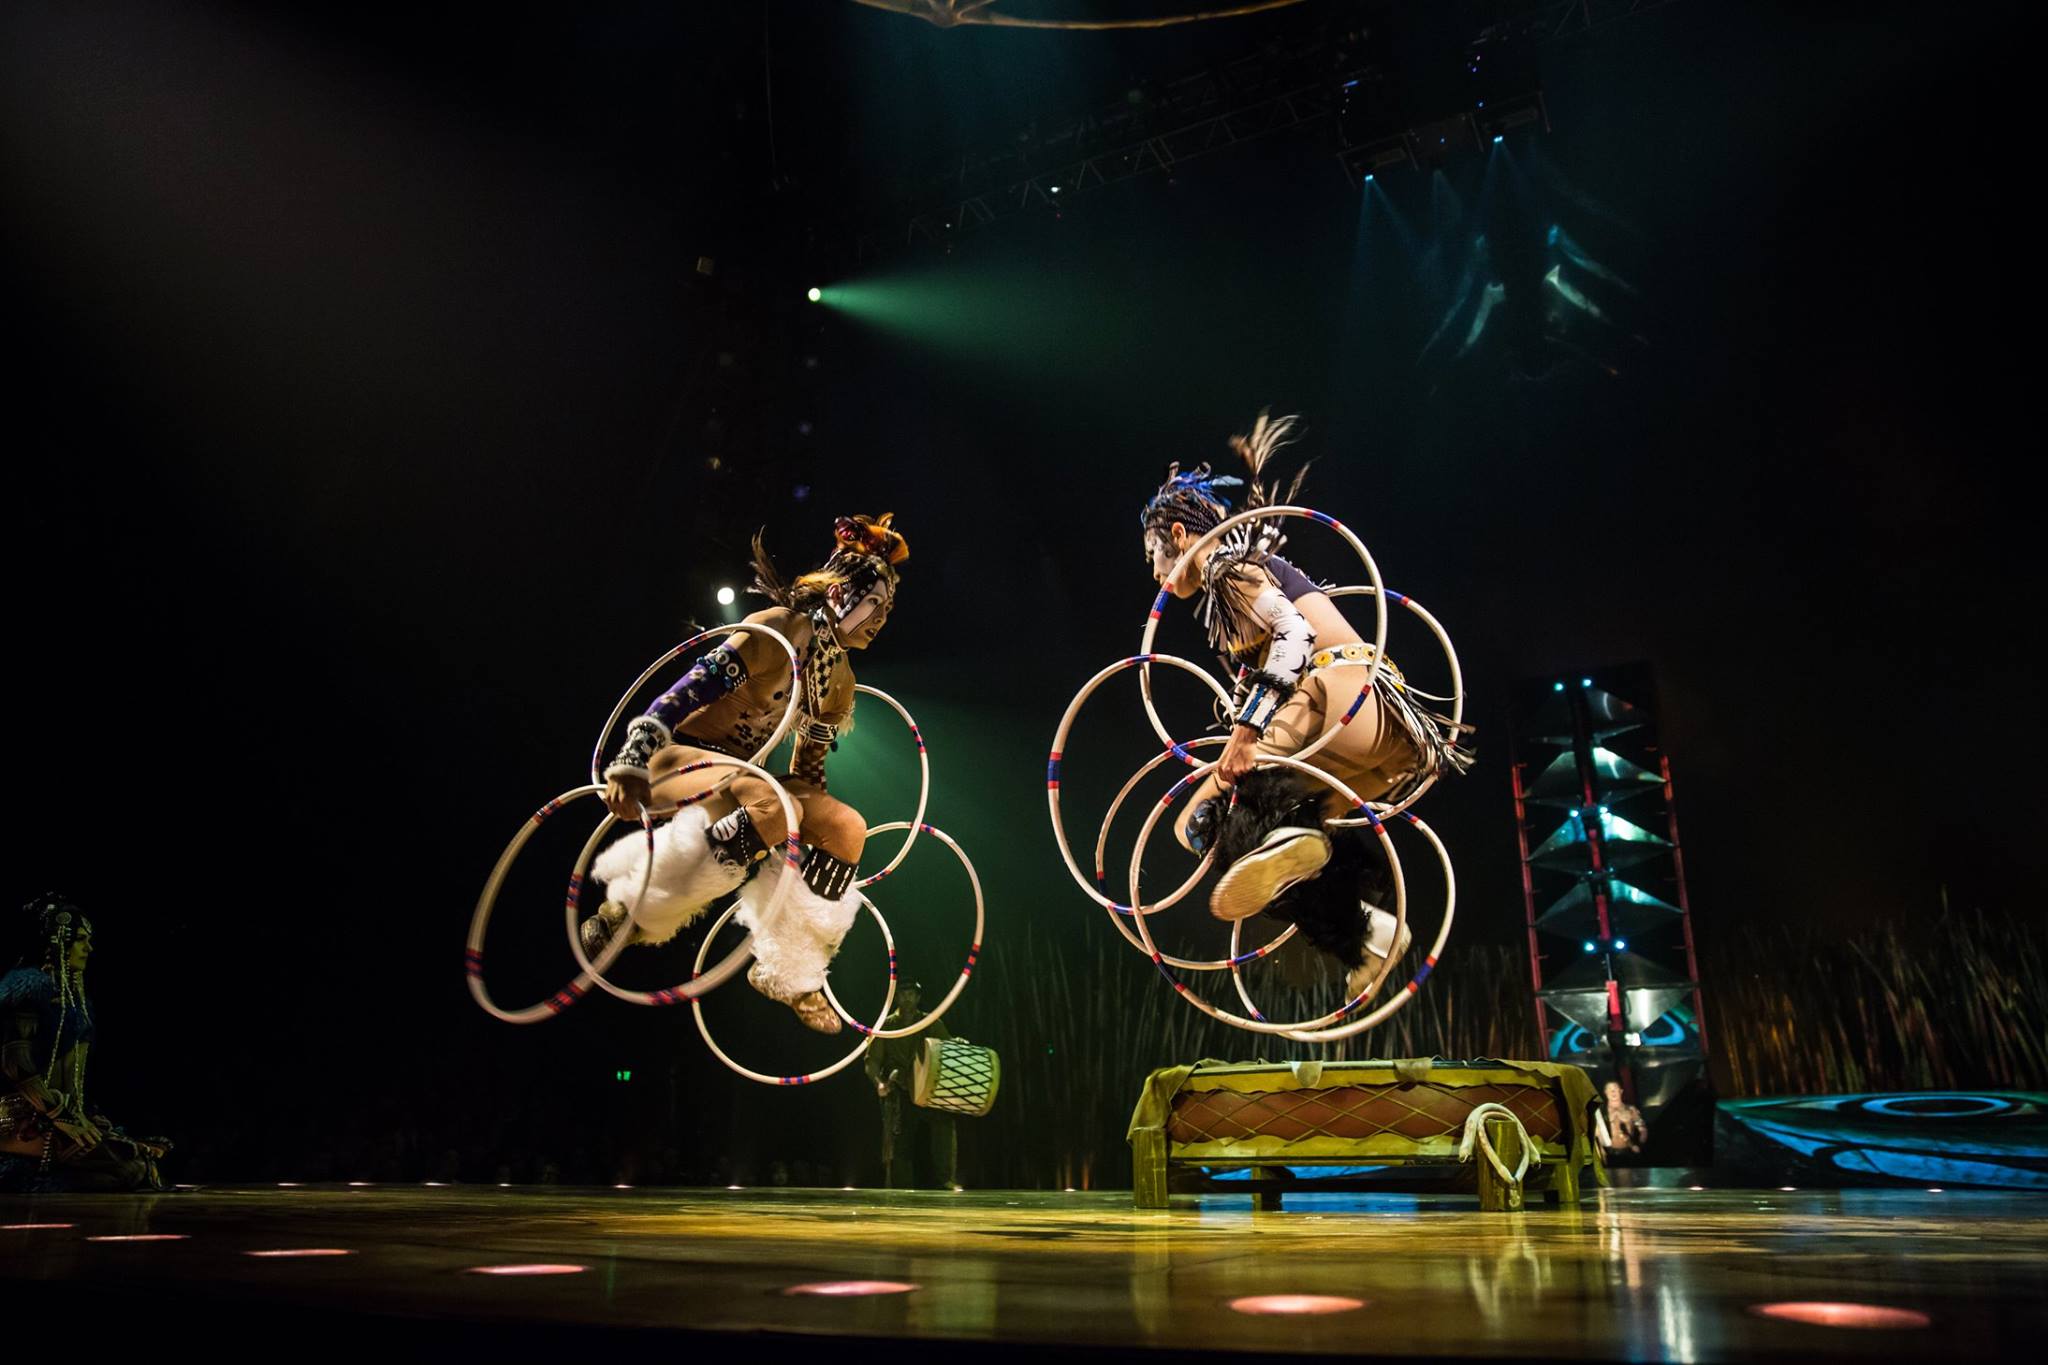 Cirque du Soleil literally jumps through hoops to put on a holiday show